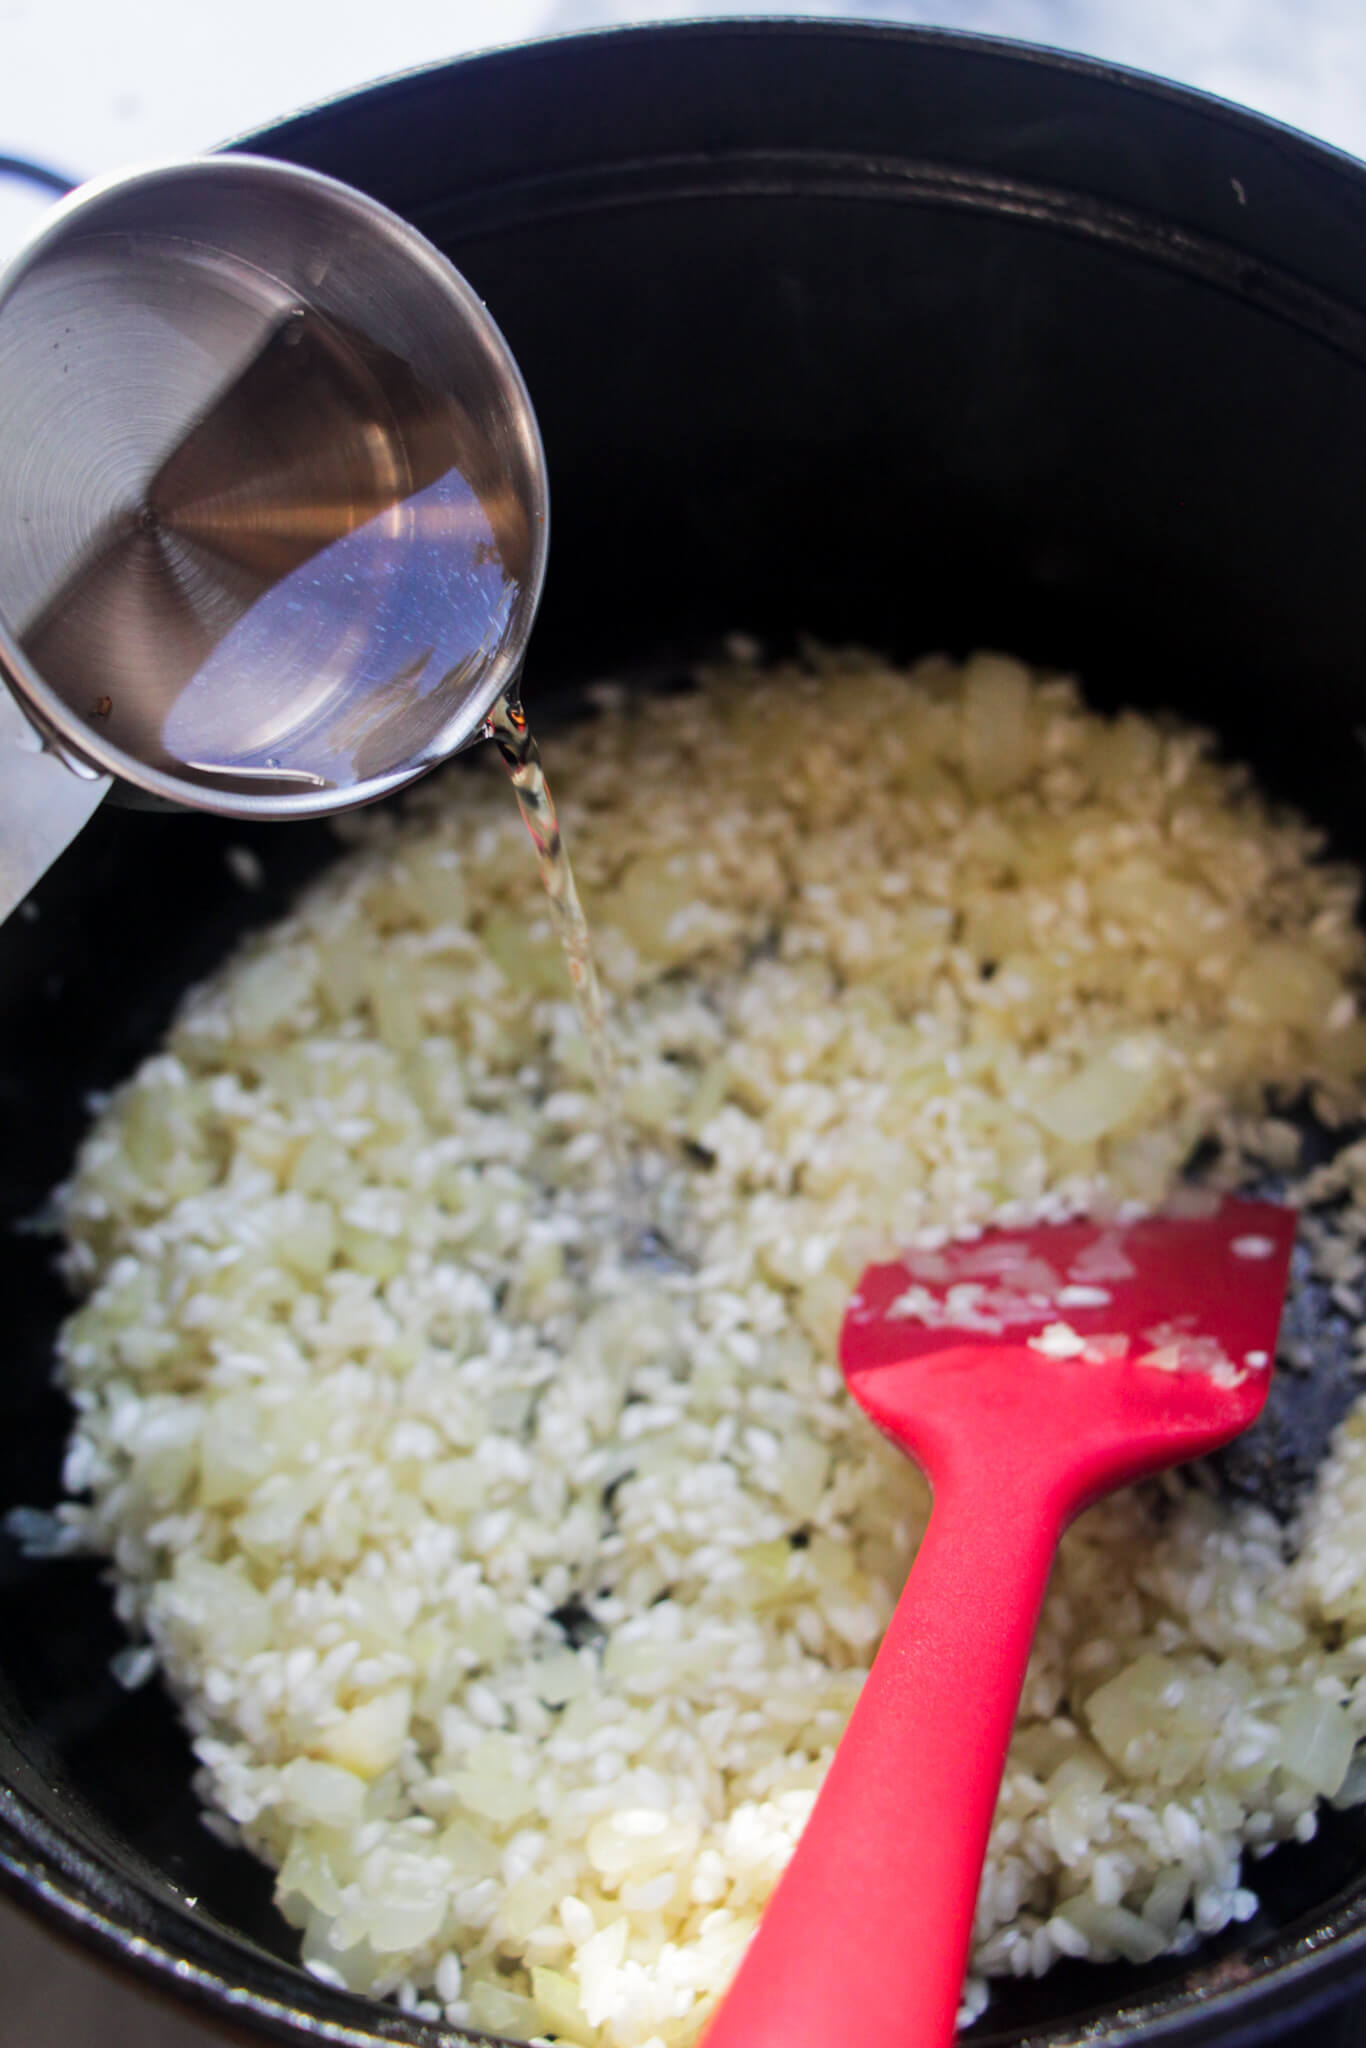 Silver cup measure adding white wine to rice, onion and garlic in a black pot with a red spatula in it.